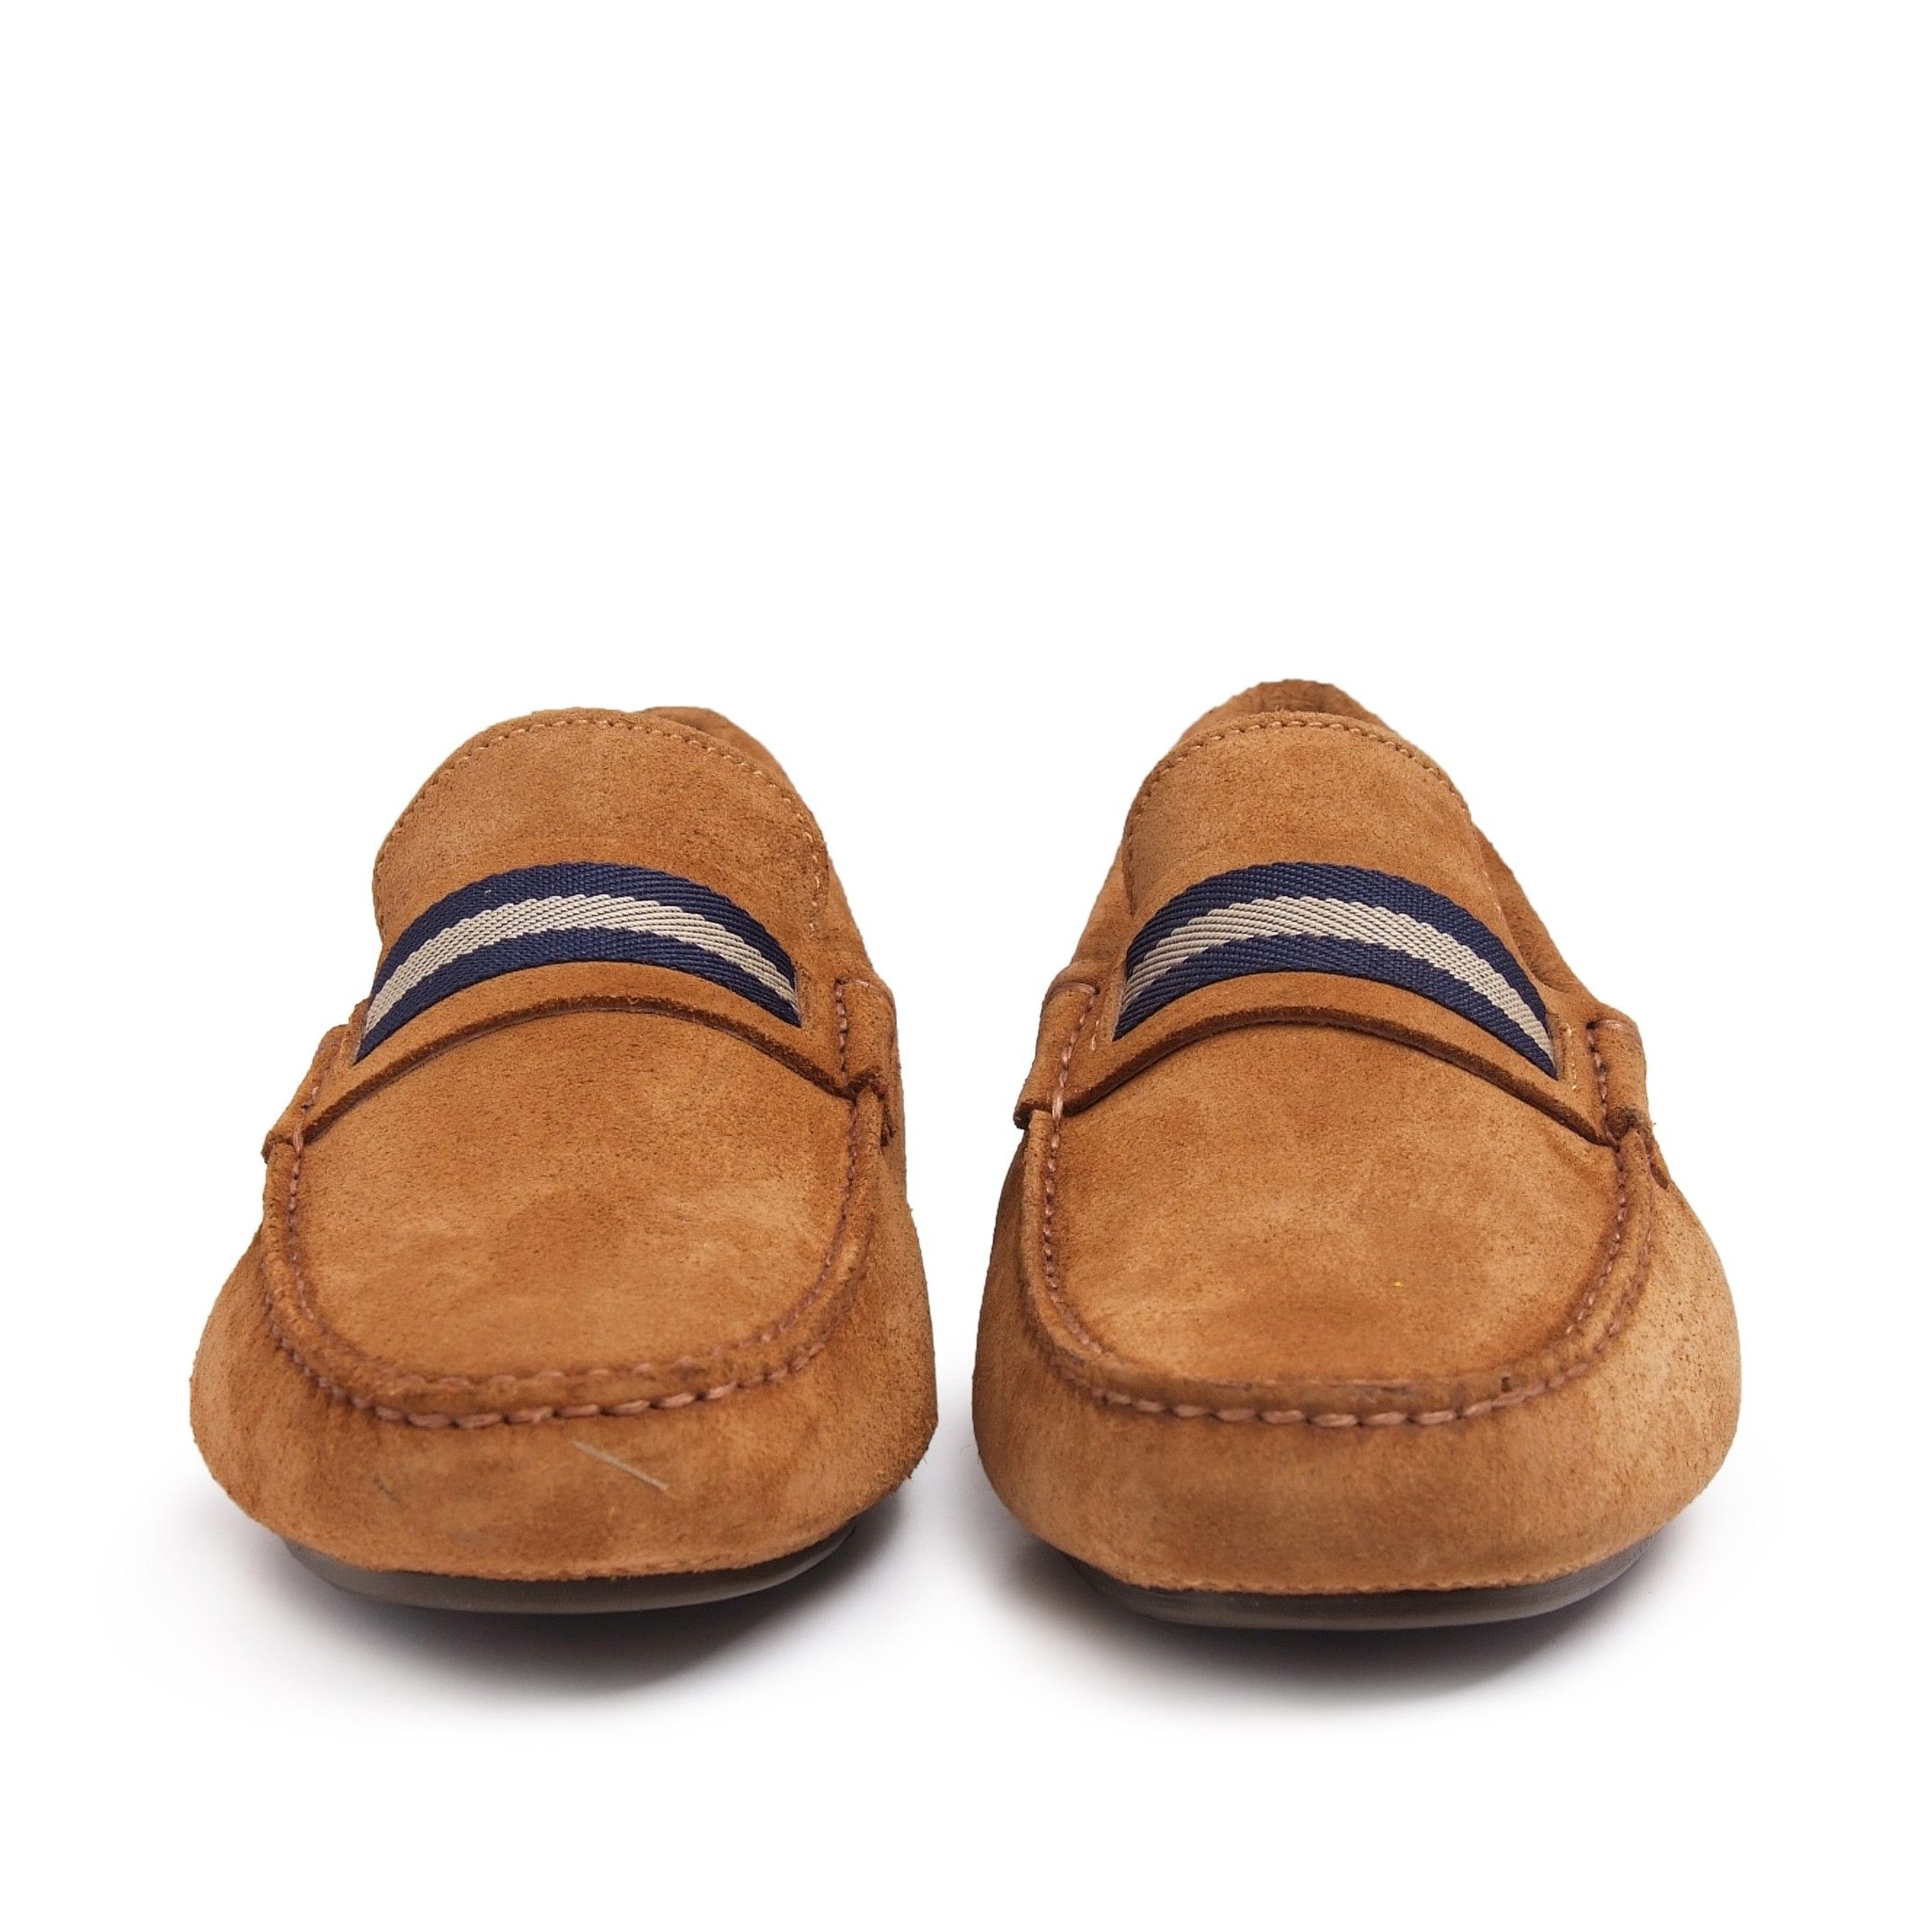 Split leather moccasins with two-color strip and stitched conductive sole. Upper made of split leather. Inner made of leather. Insole made of leather. Sole made of Polyurethane. This product is manufactured in Spain.